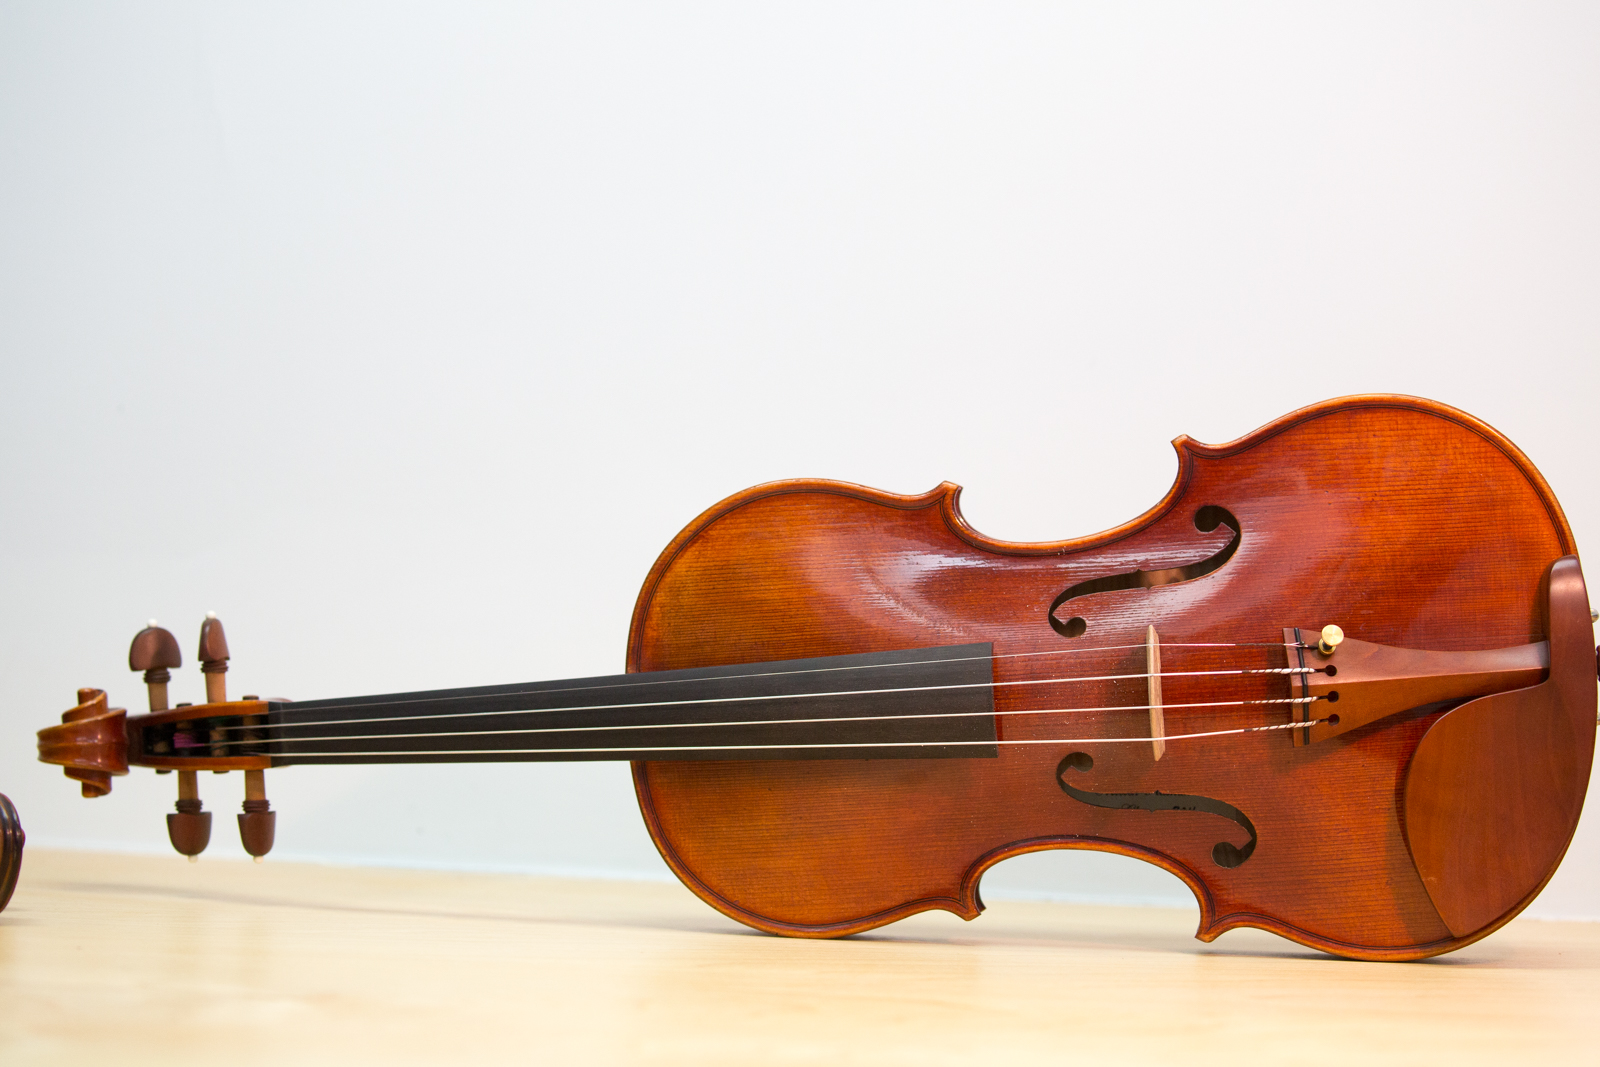 Delicately Preserving the Iconic Legacy: Maintenance Tips for Expensive Violins